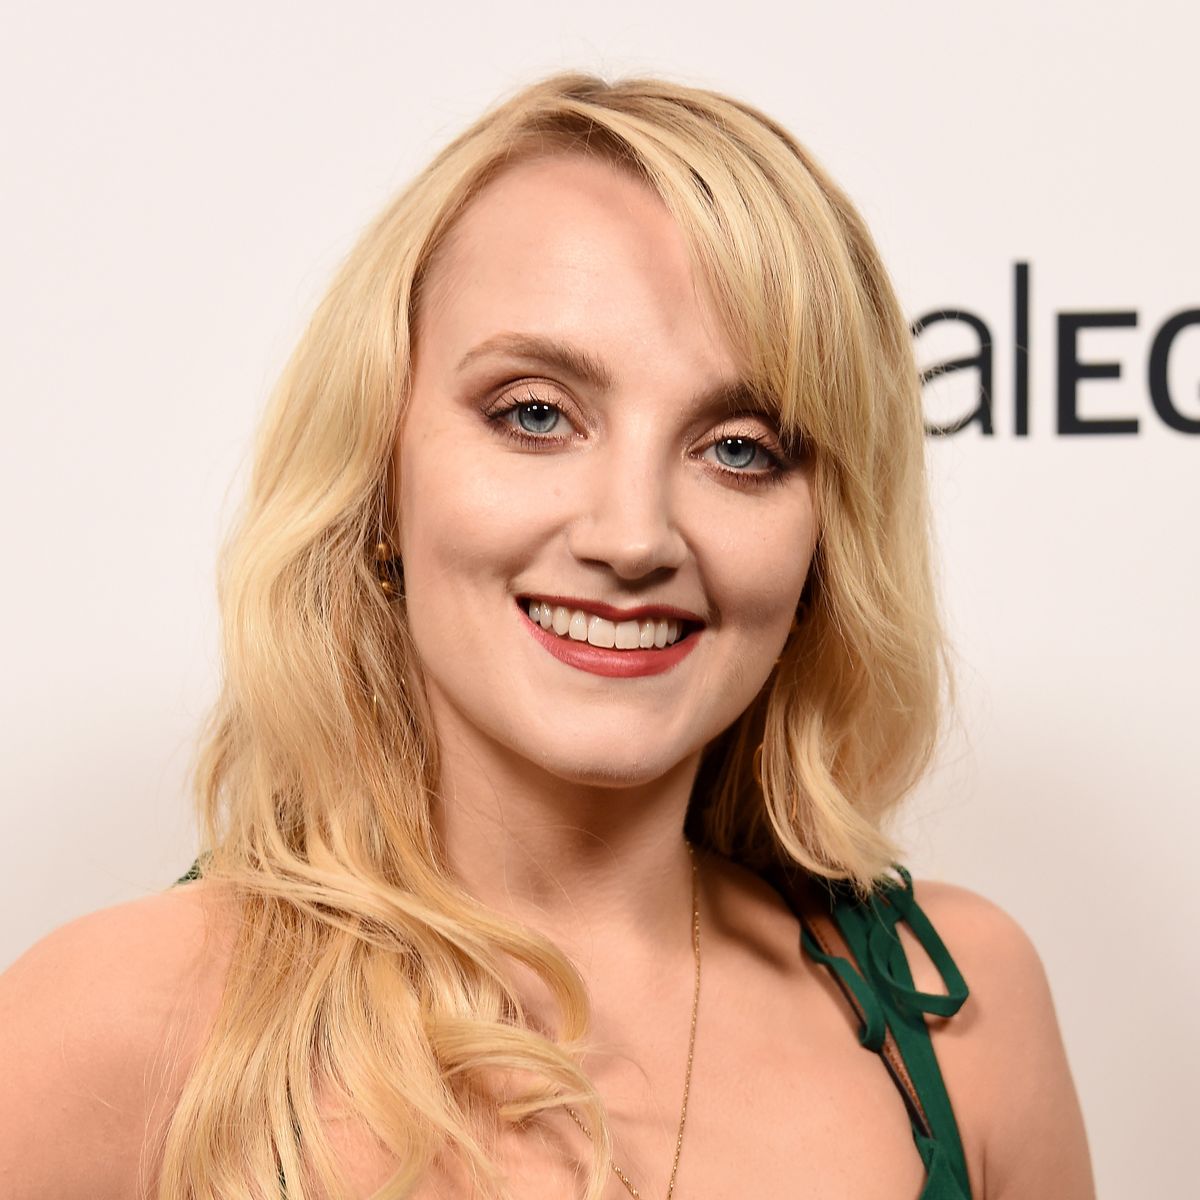 What is the name of the actor who portrayed Luna Lovegood's mother?